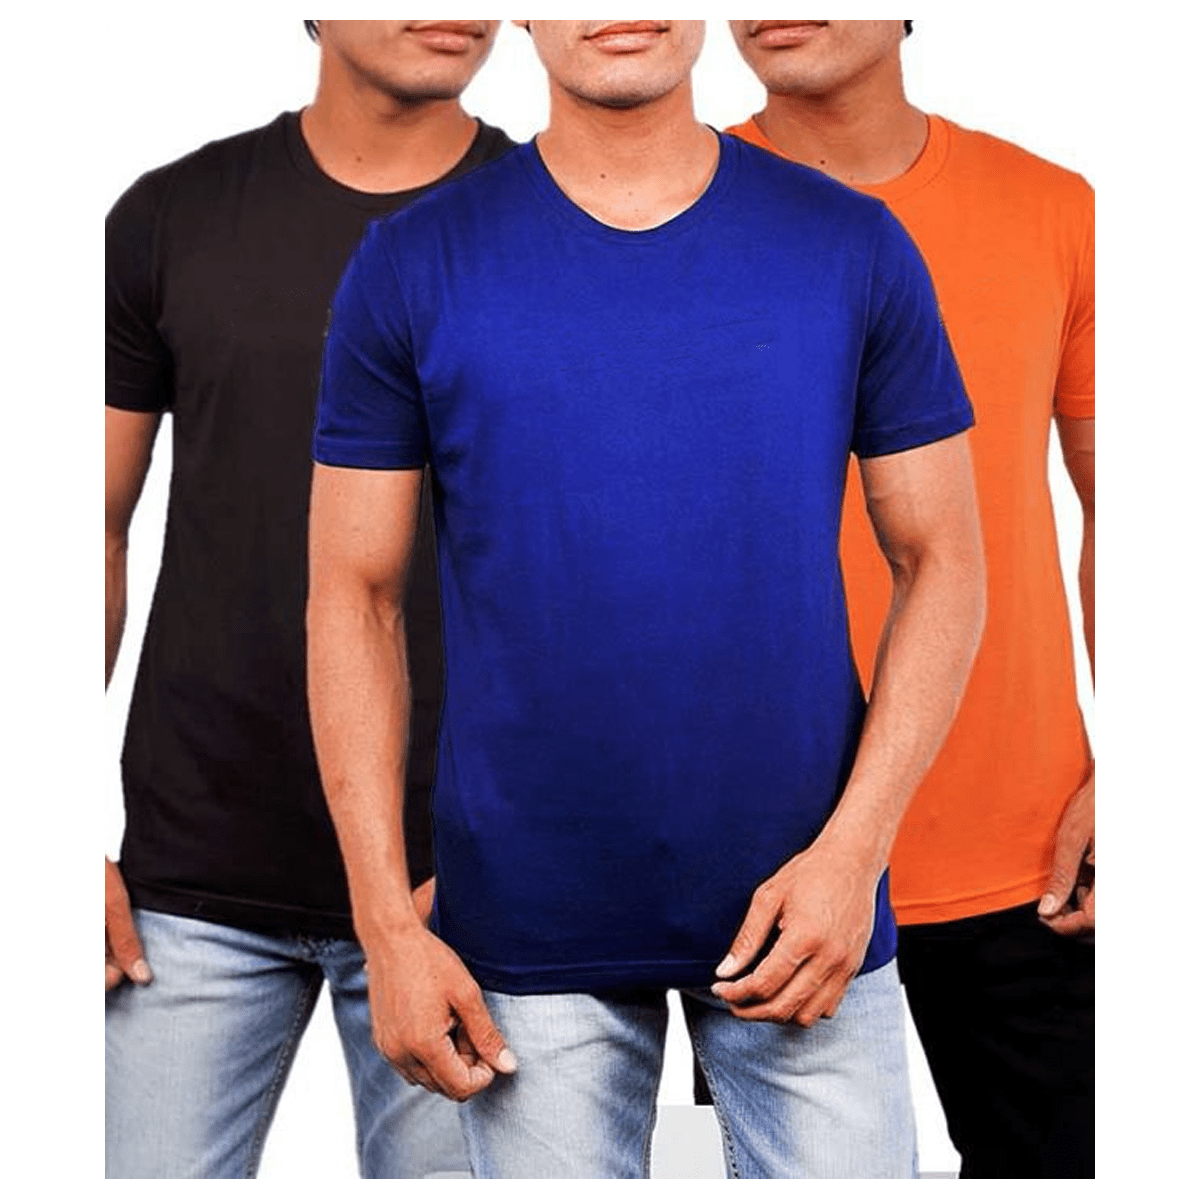 Promotional Round Neck T-Shirts 180gsm